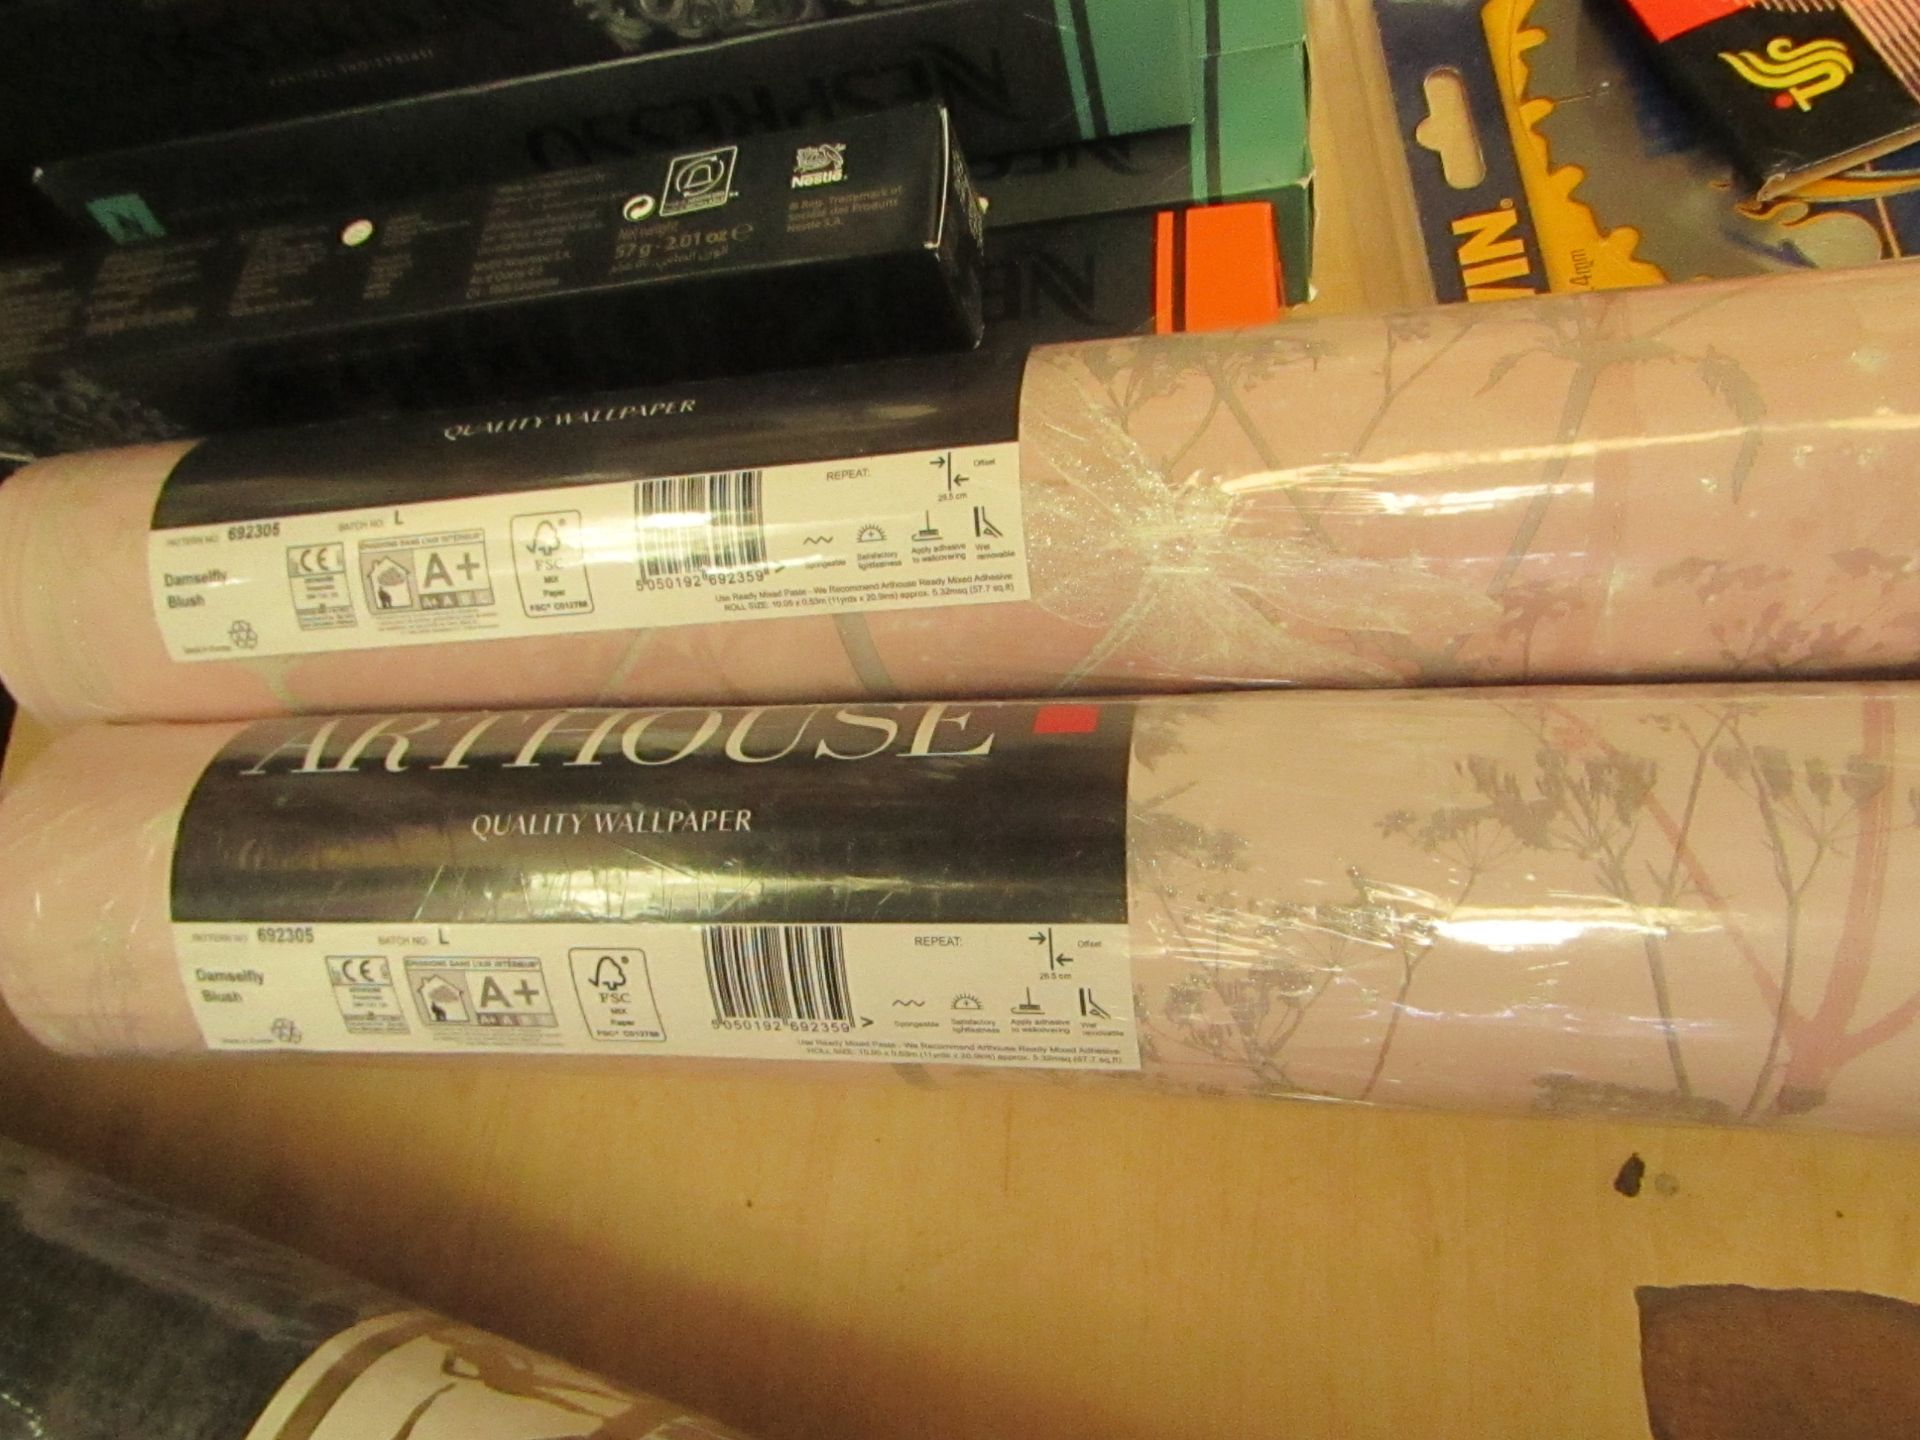 2 x Rolls of arthouse wallpaper. See image. Packaged